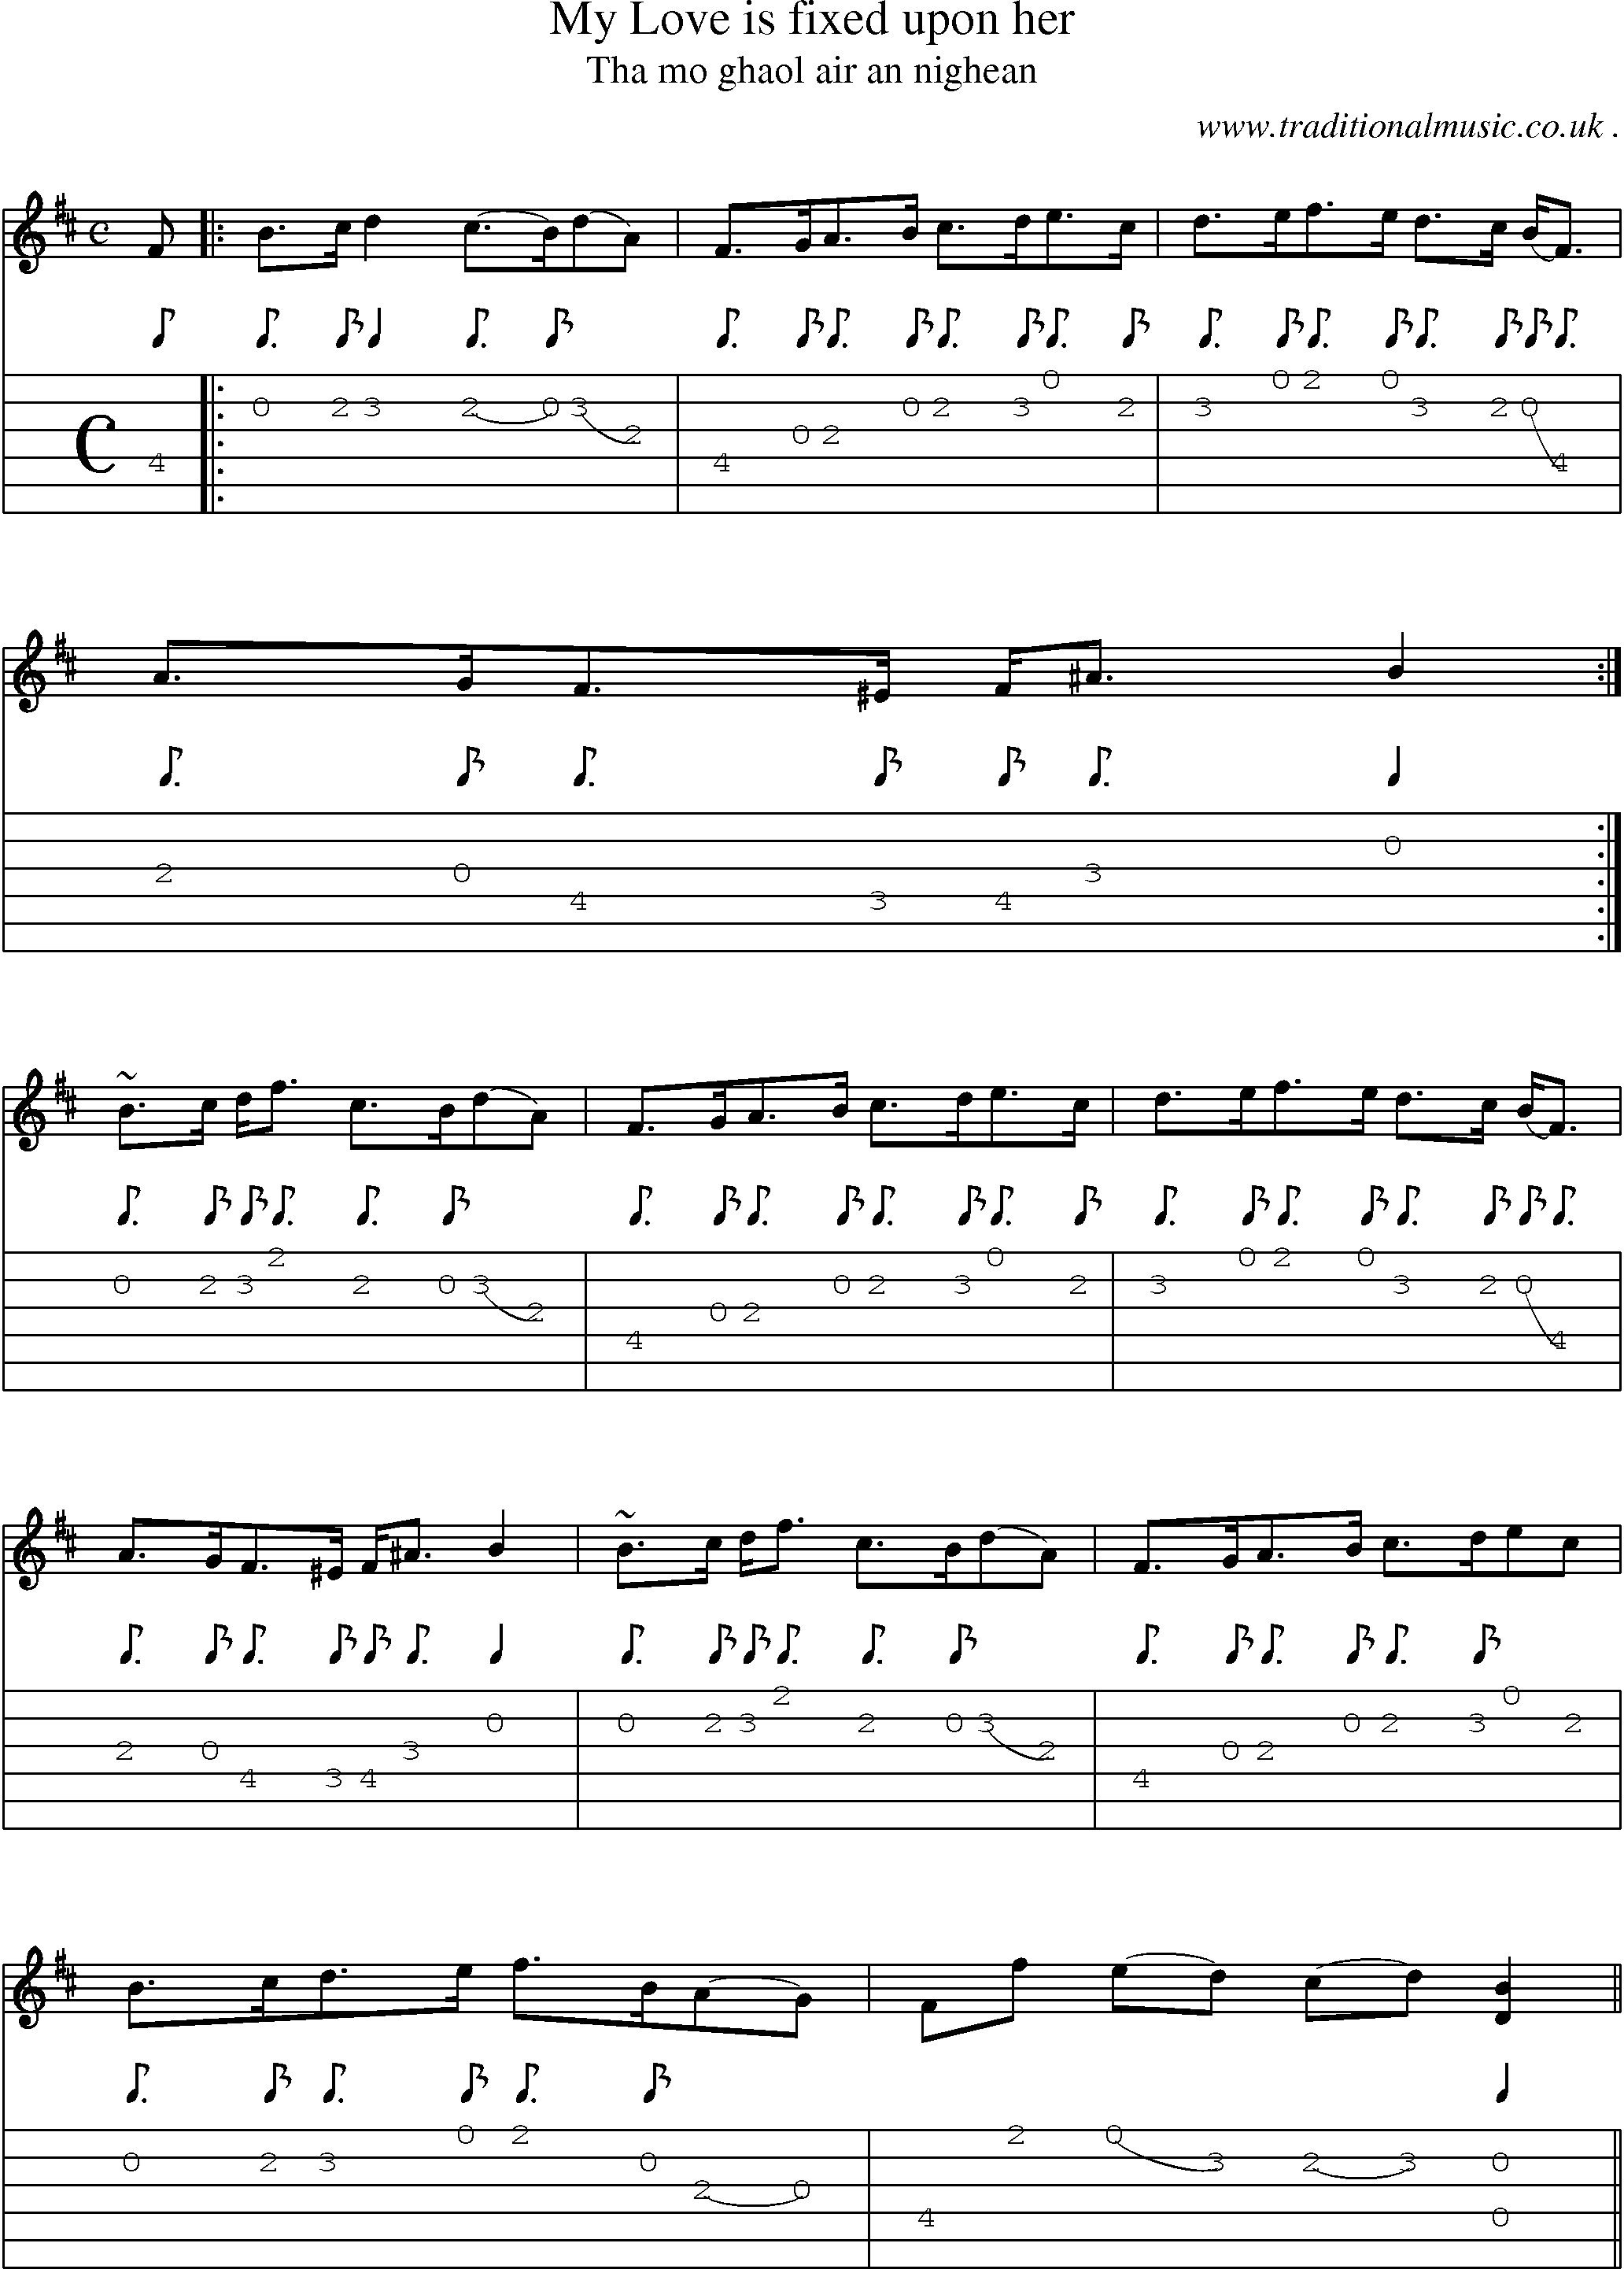 Sheet-music  score, Chords and Guitar Tabs for My Love Is Fixed Upon Her